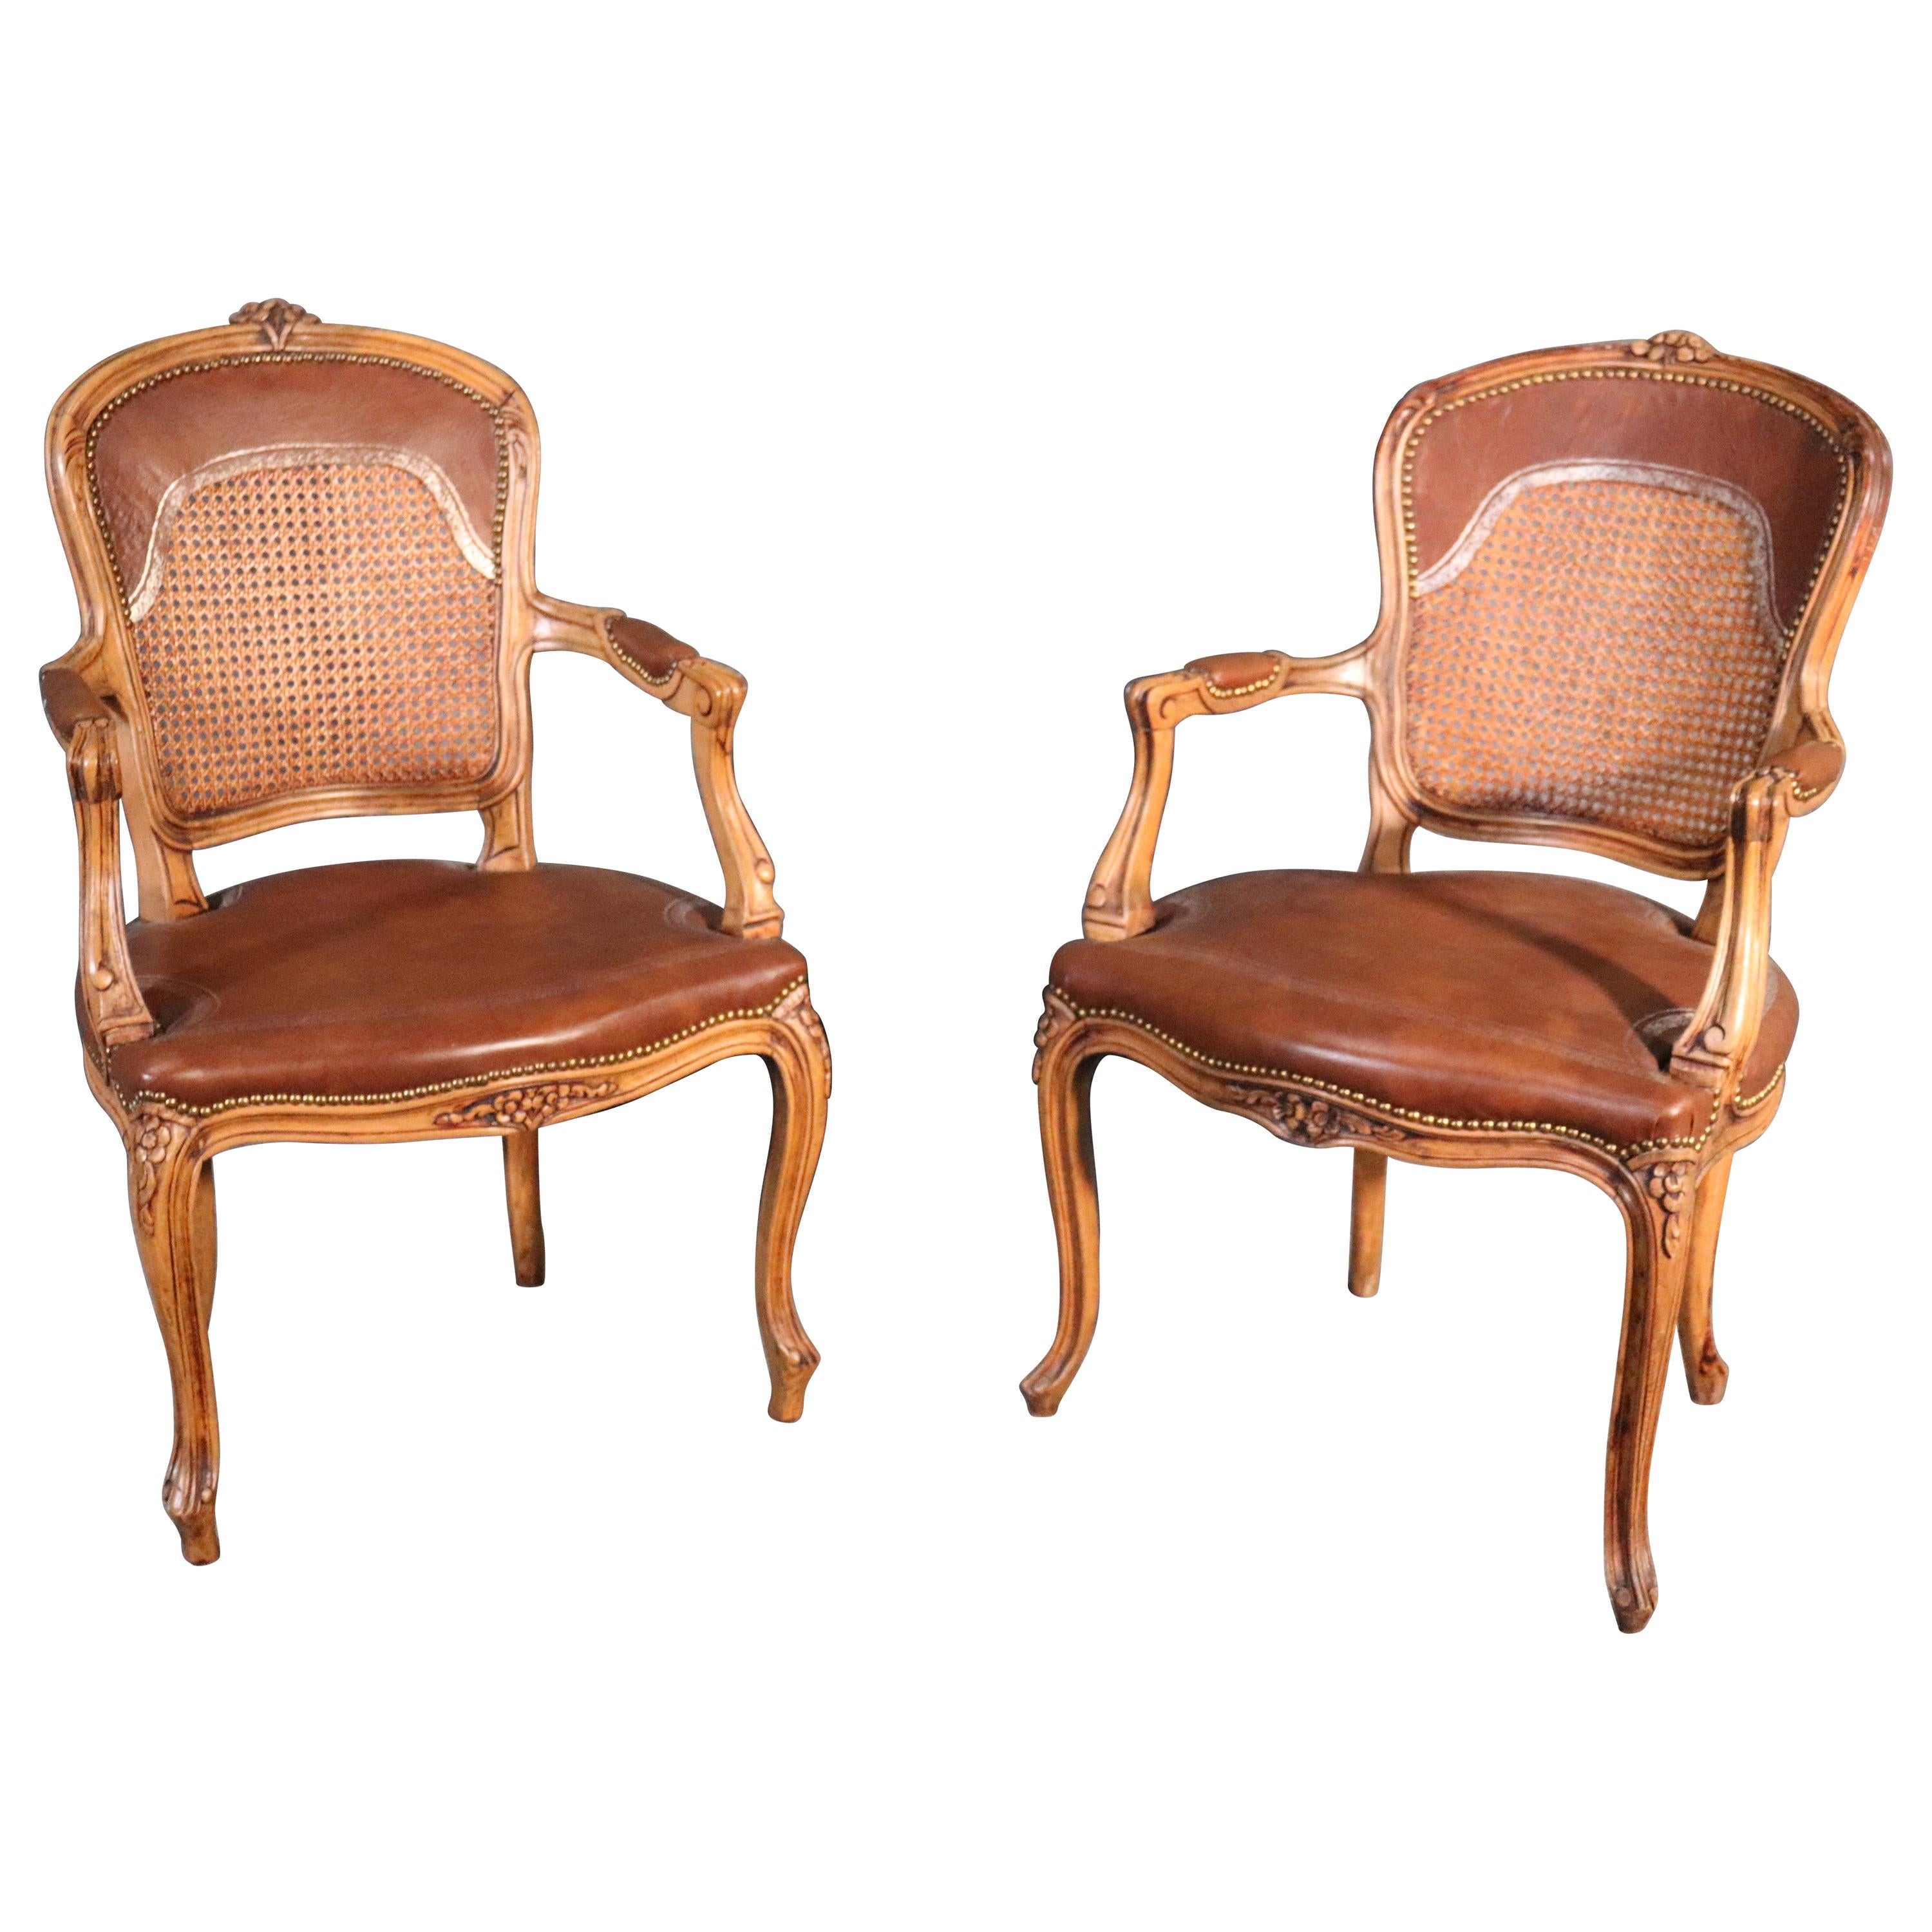 Pair of French Carved Caned Back French Louis XV Armchairs Fauteuils, circa 1940